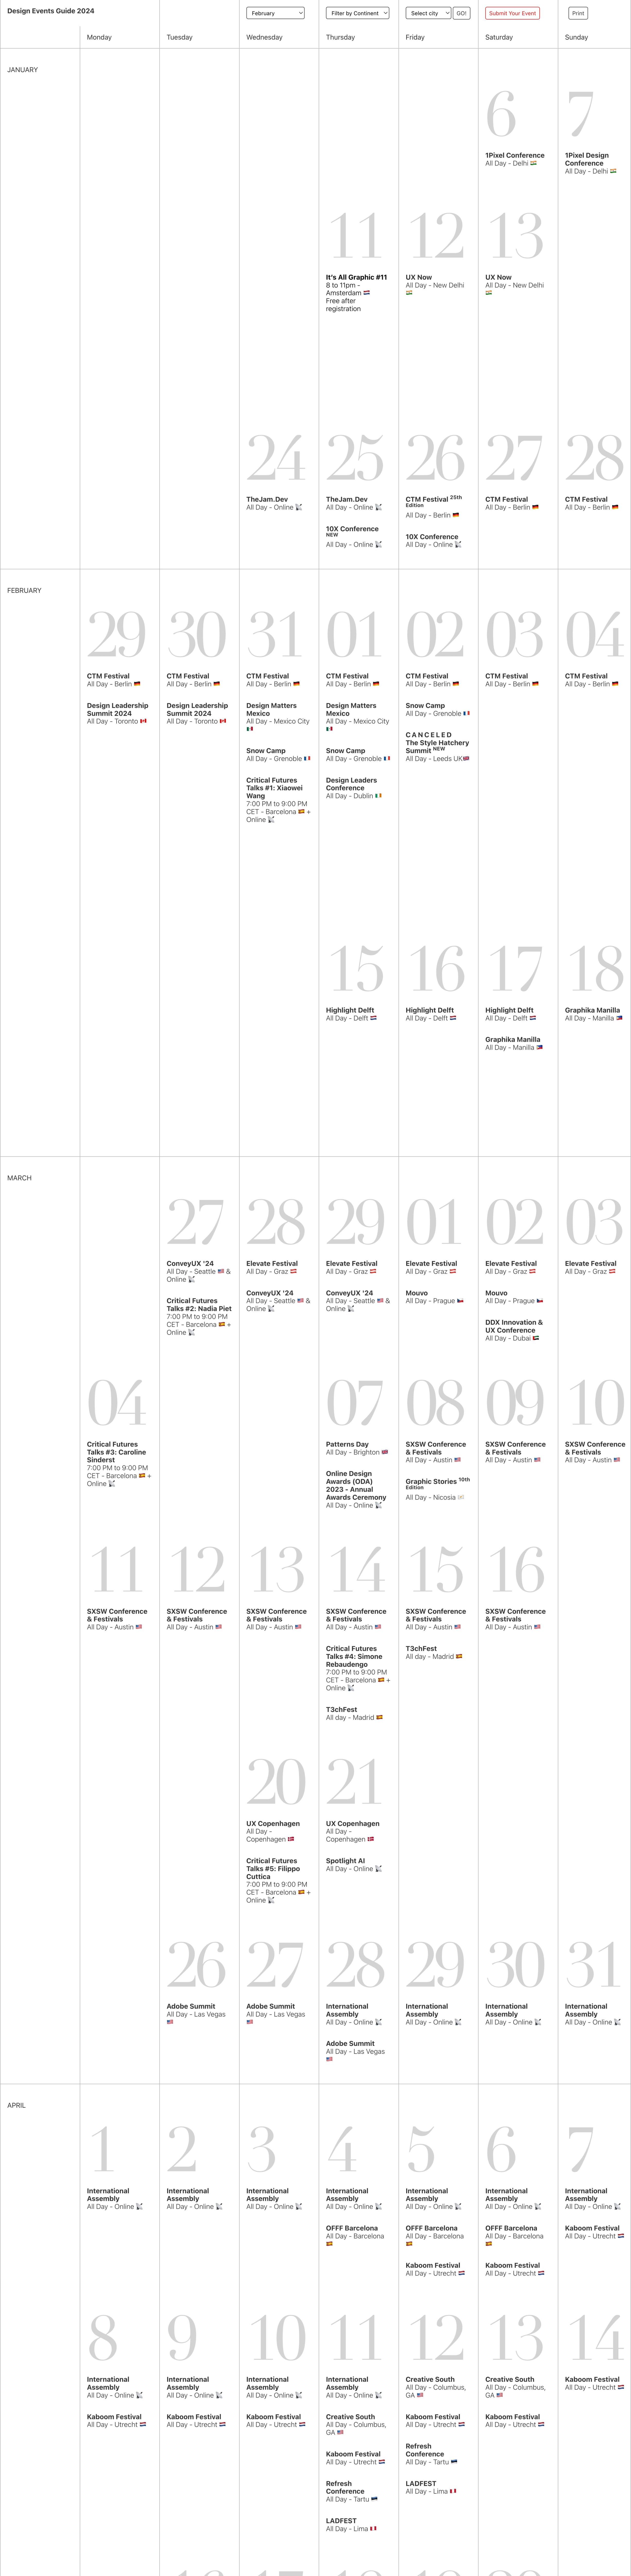 Calendar-style One Pager listing all announced design events happening around the world. photo: onepagelove